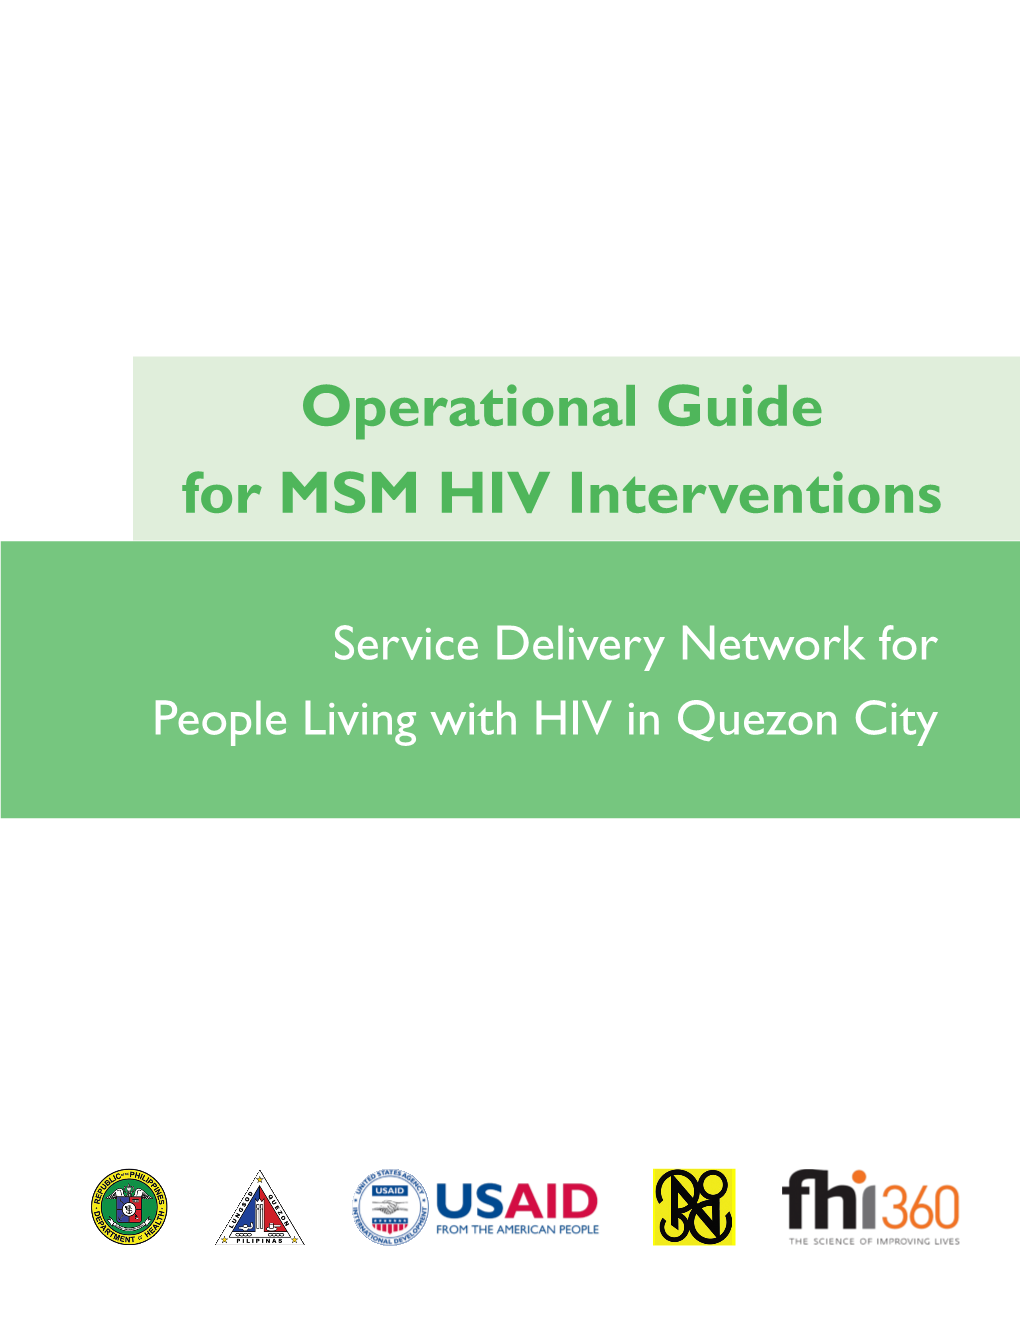 Operational Guide for MSM HIV Interventions